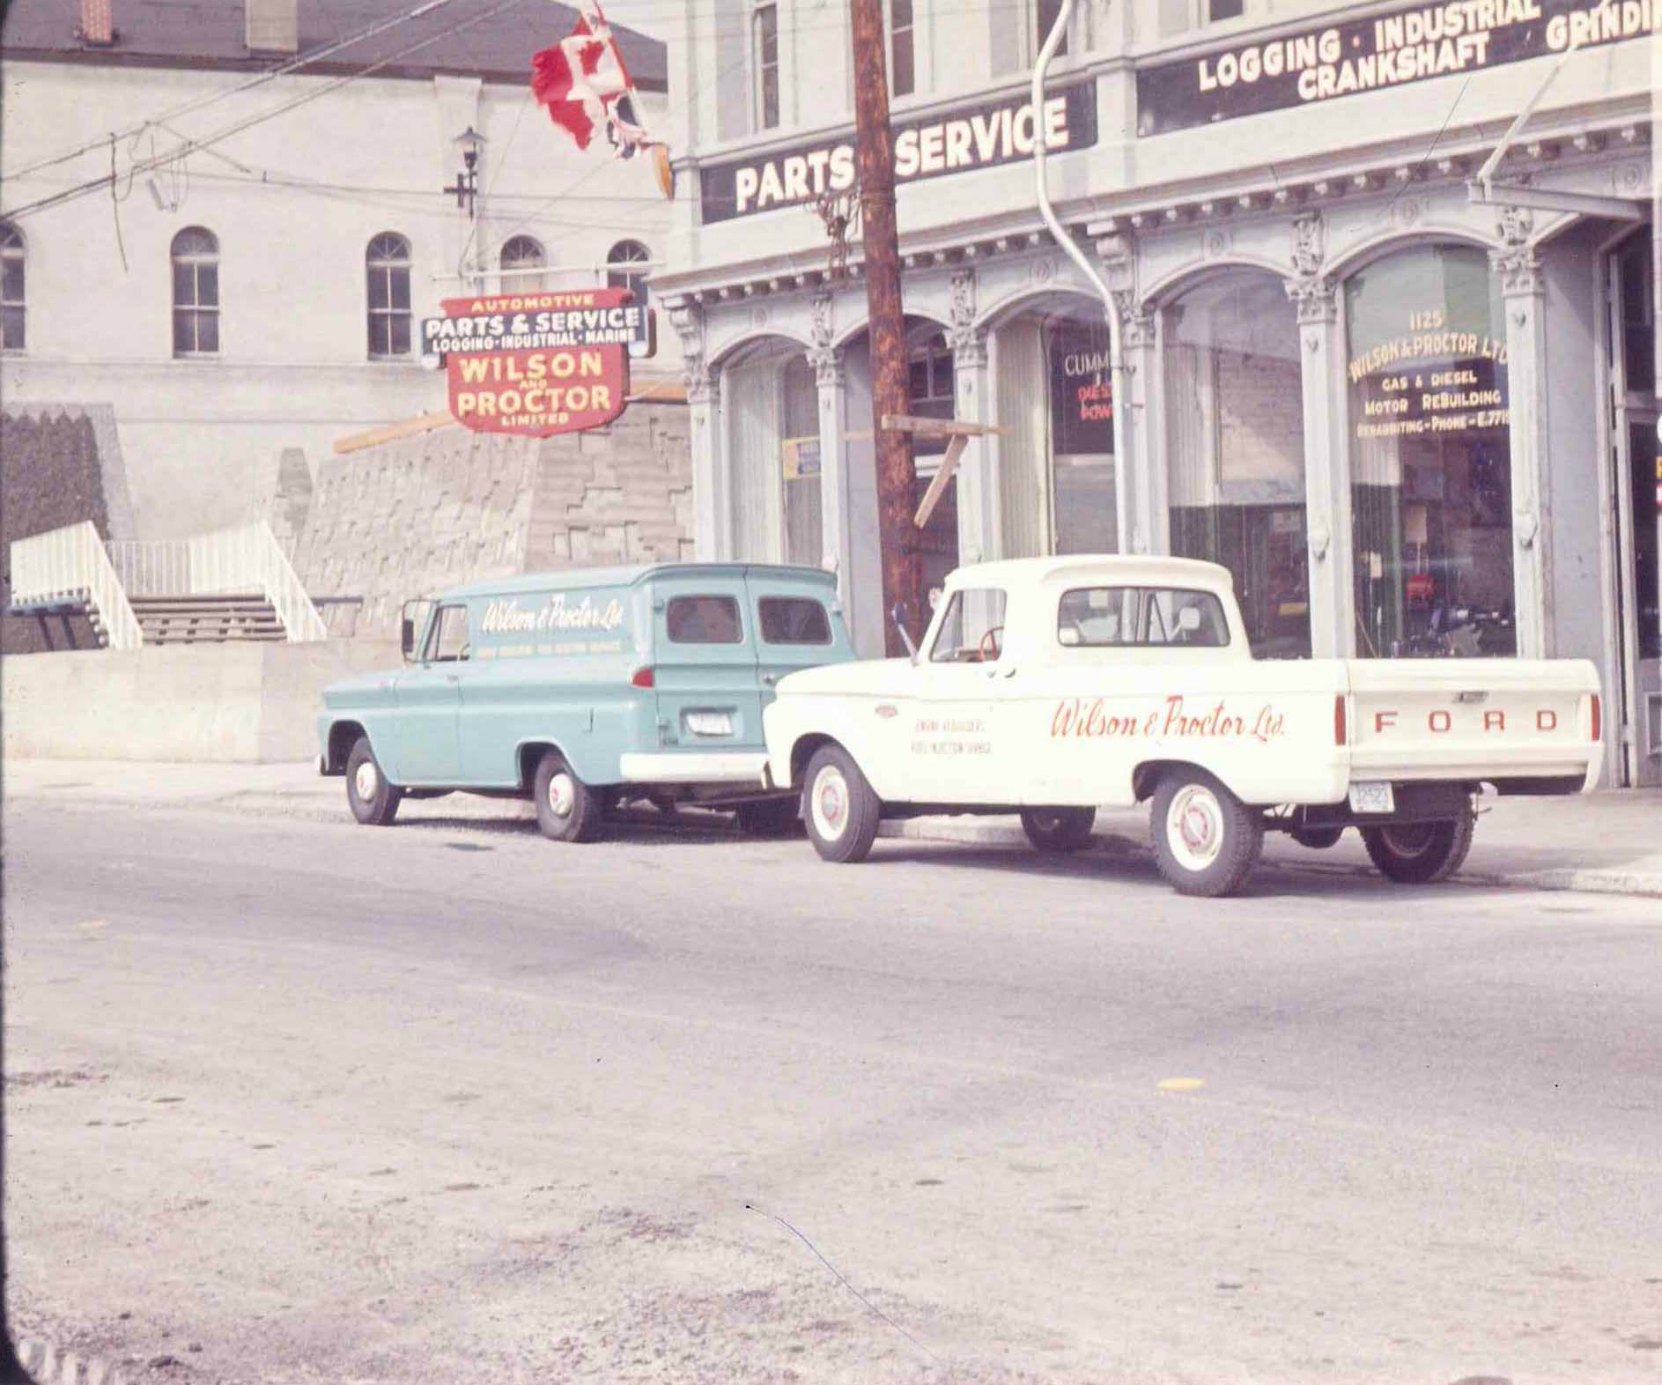 1129 Wharf Street, circa 1966, when it was owned by Wilson & Proctor Ltd.